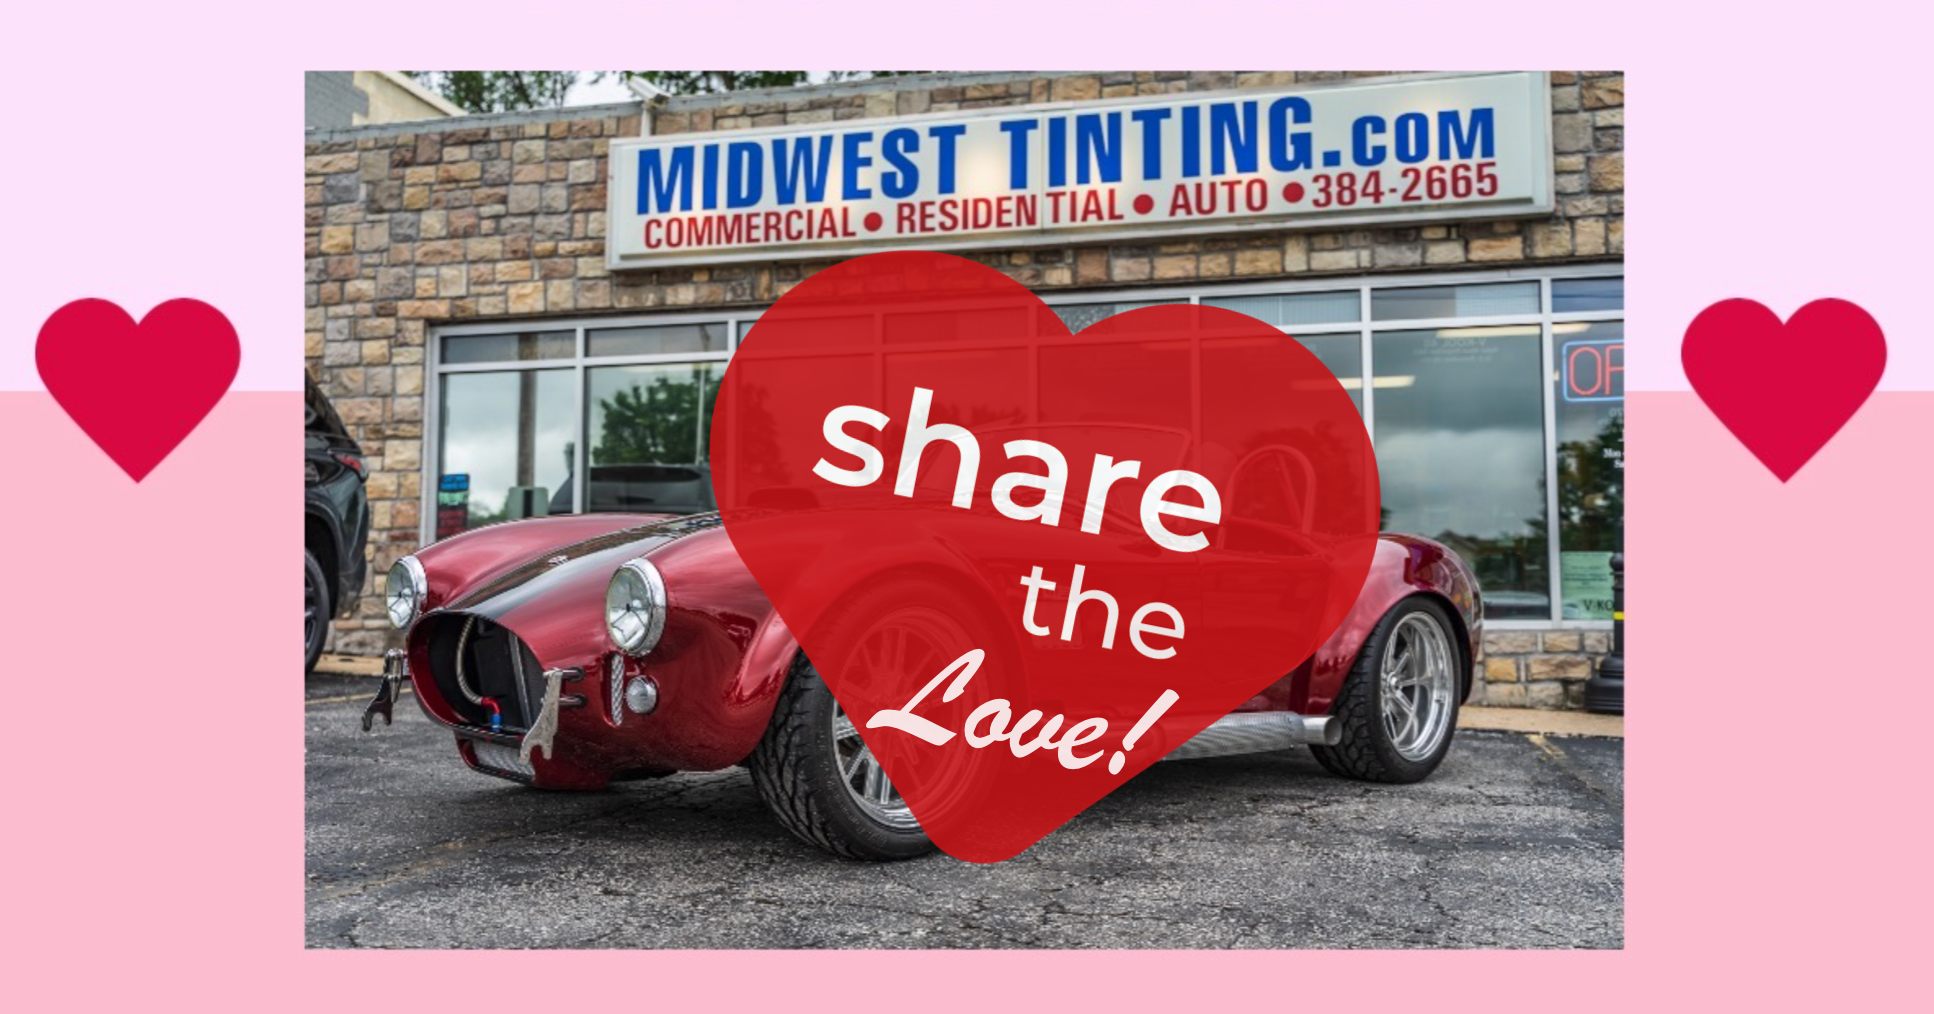 Share the Love by giving us a review and get 15% Off any service with Midwest Tinting. Check out the link below for more details.